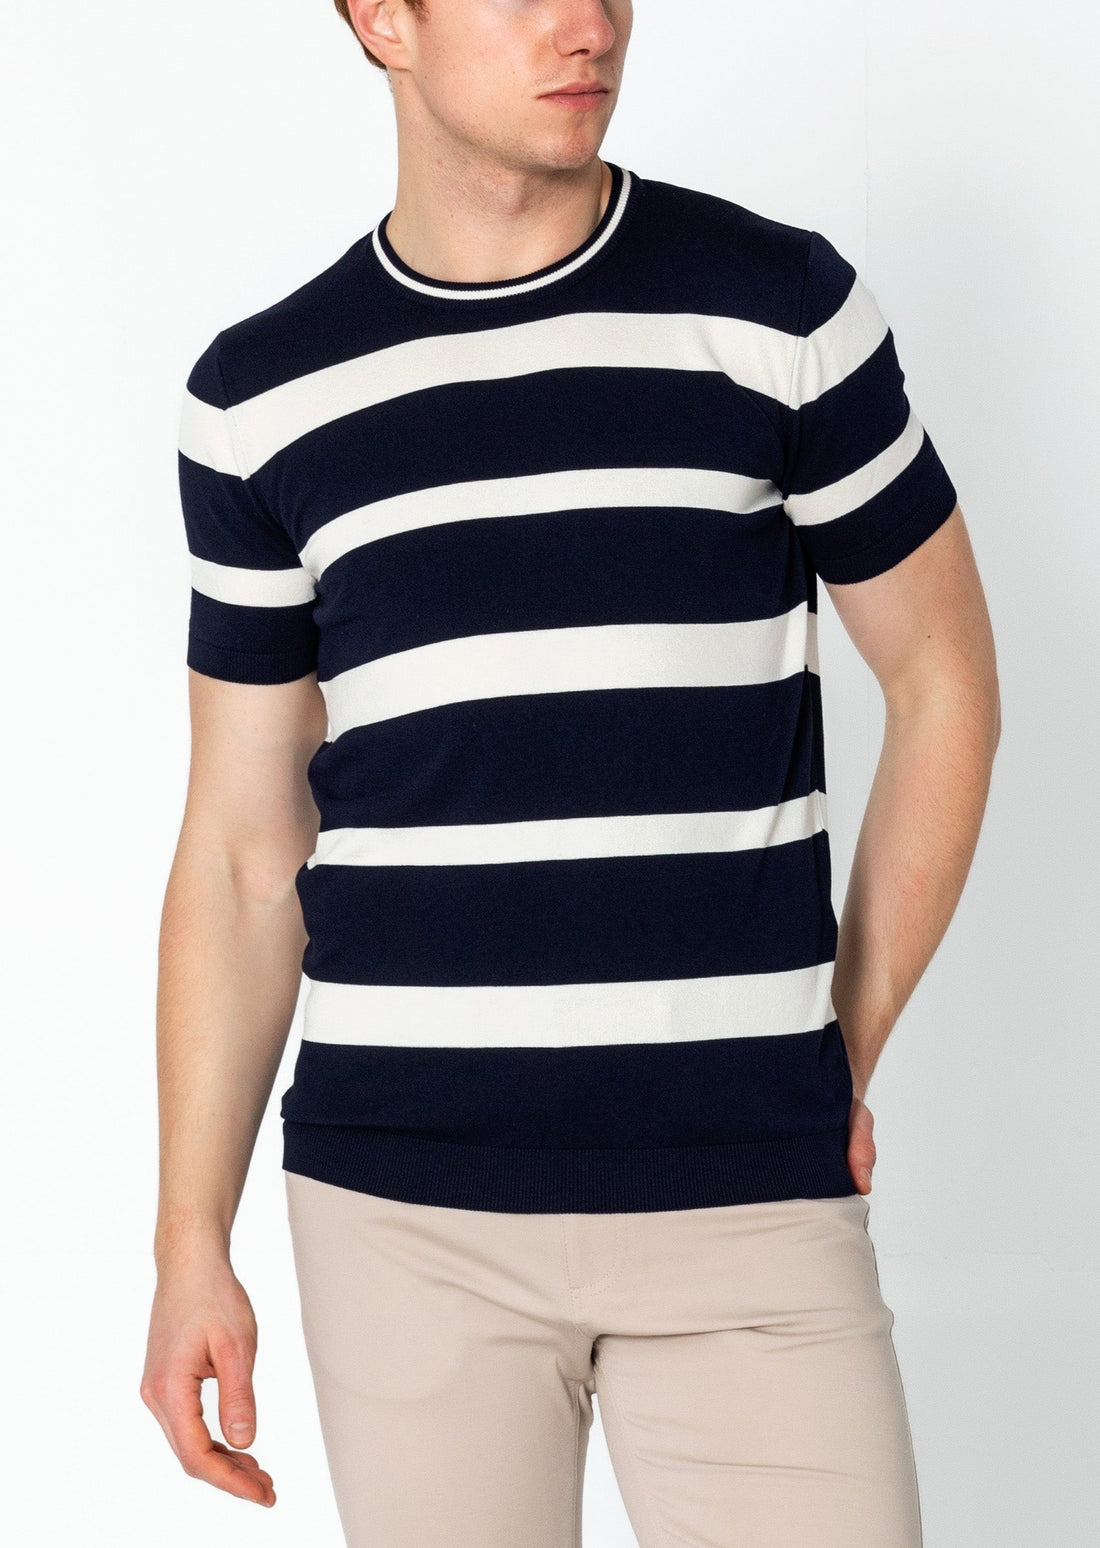 Crew-neck Knitted Striped Shirt - Navy